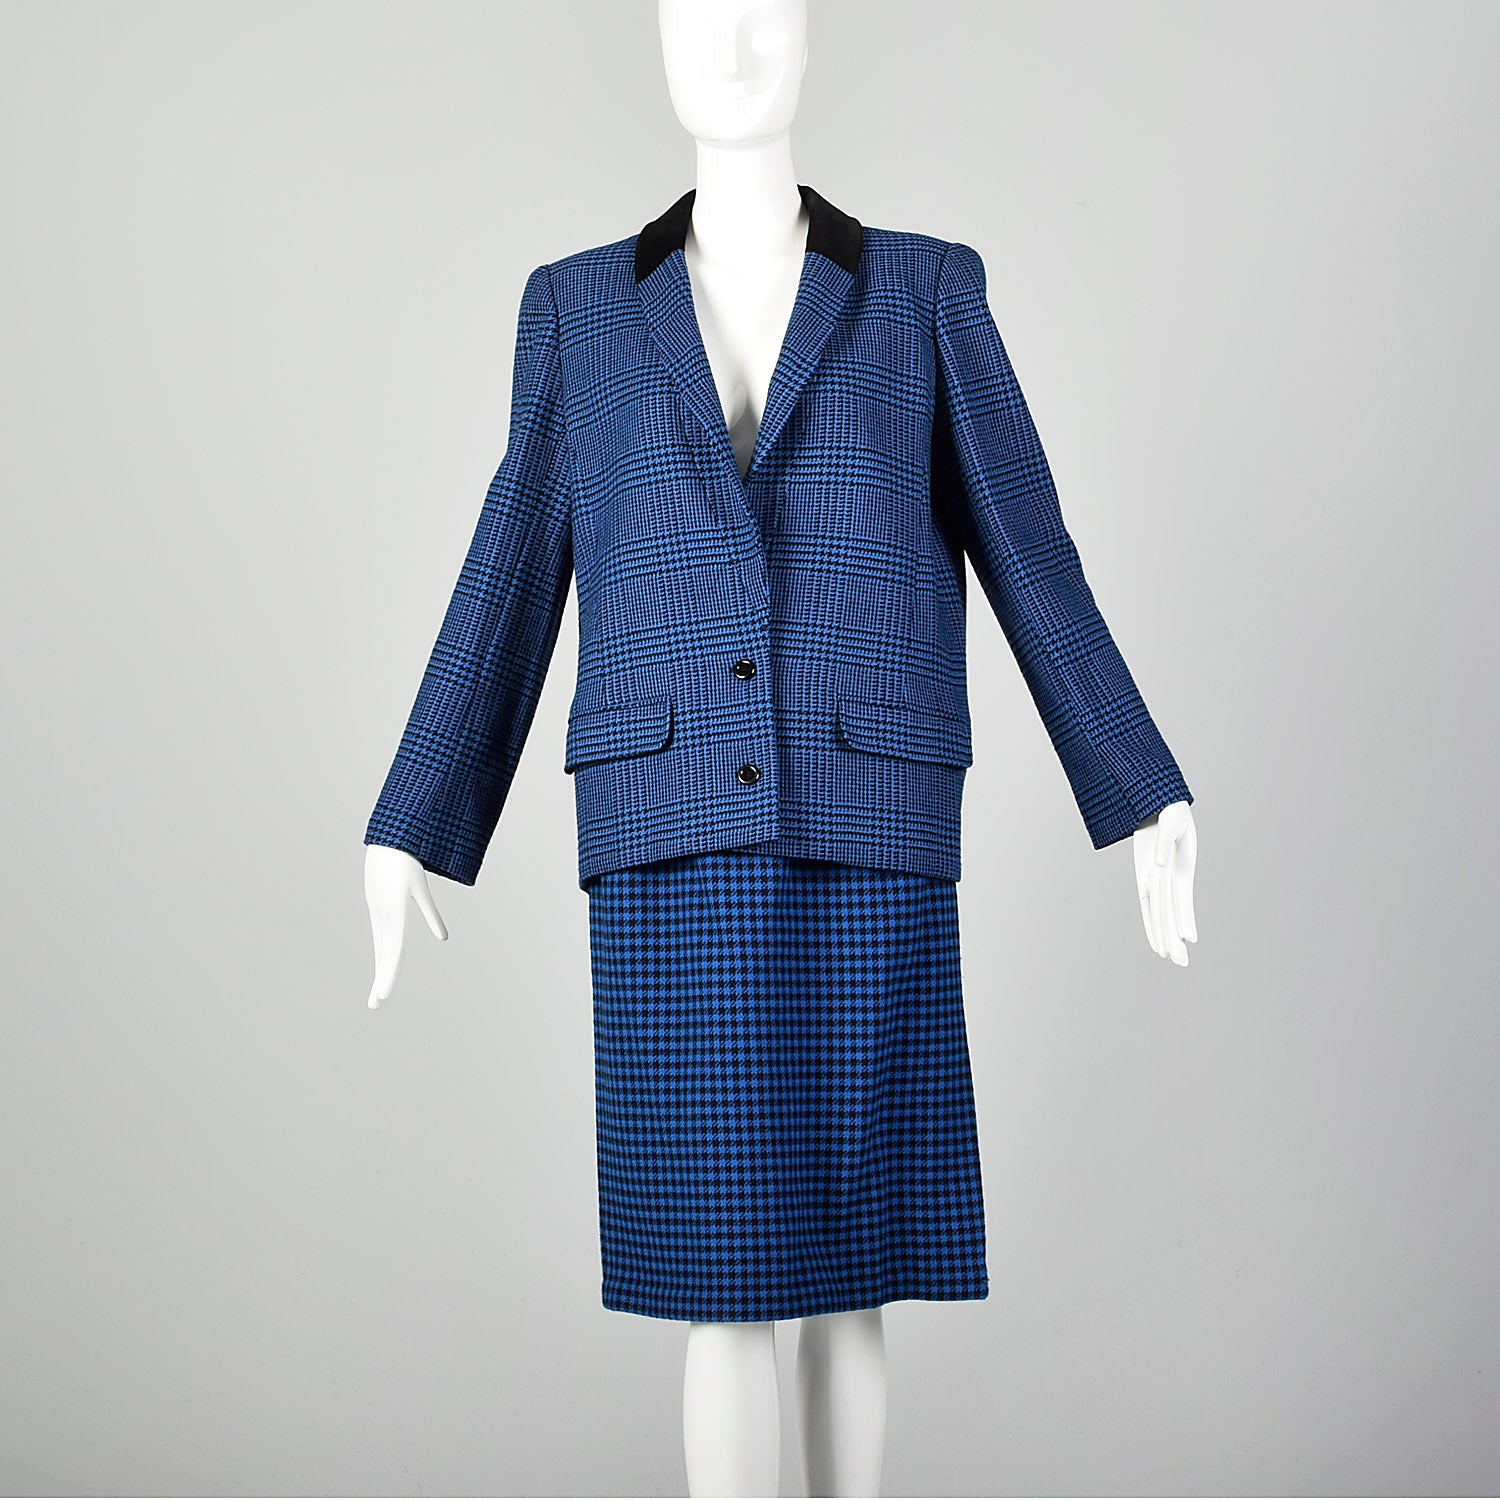 Lot 49 - Chanel Houndstooth Skirt Suit - Size 36